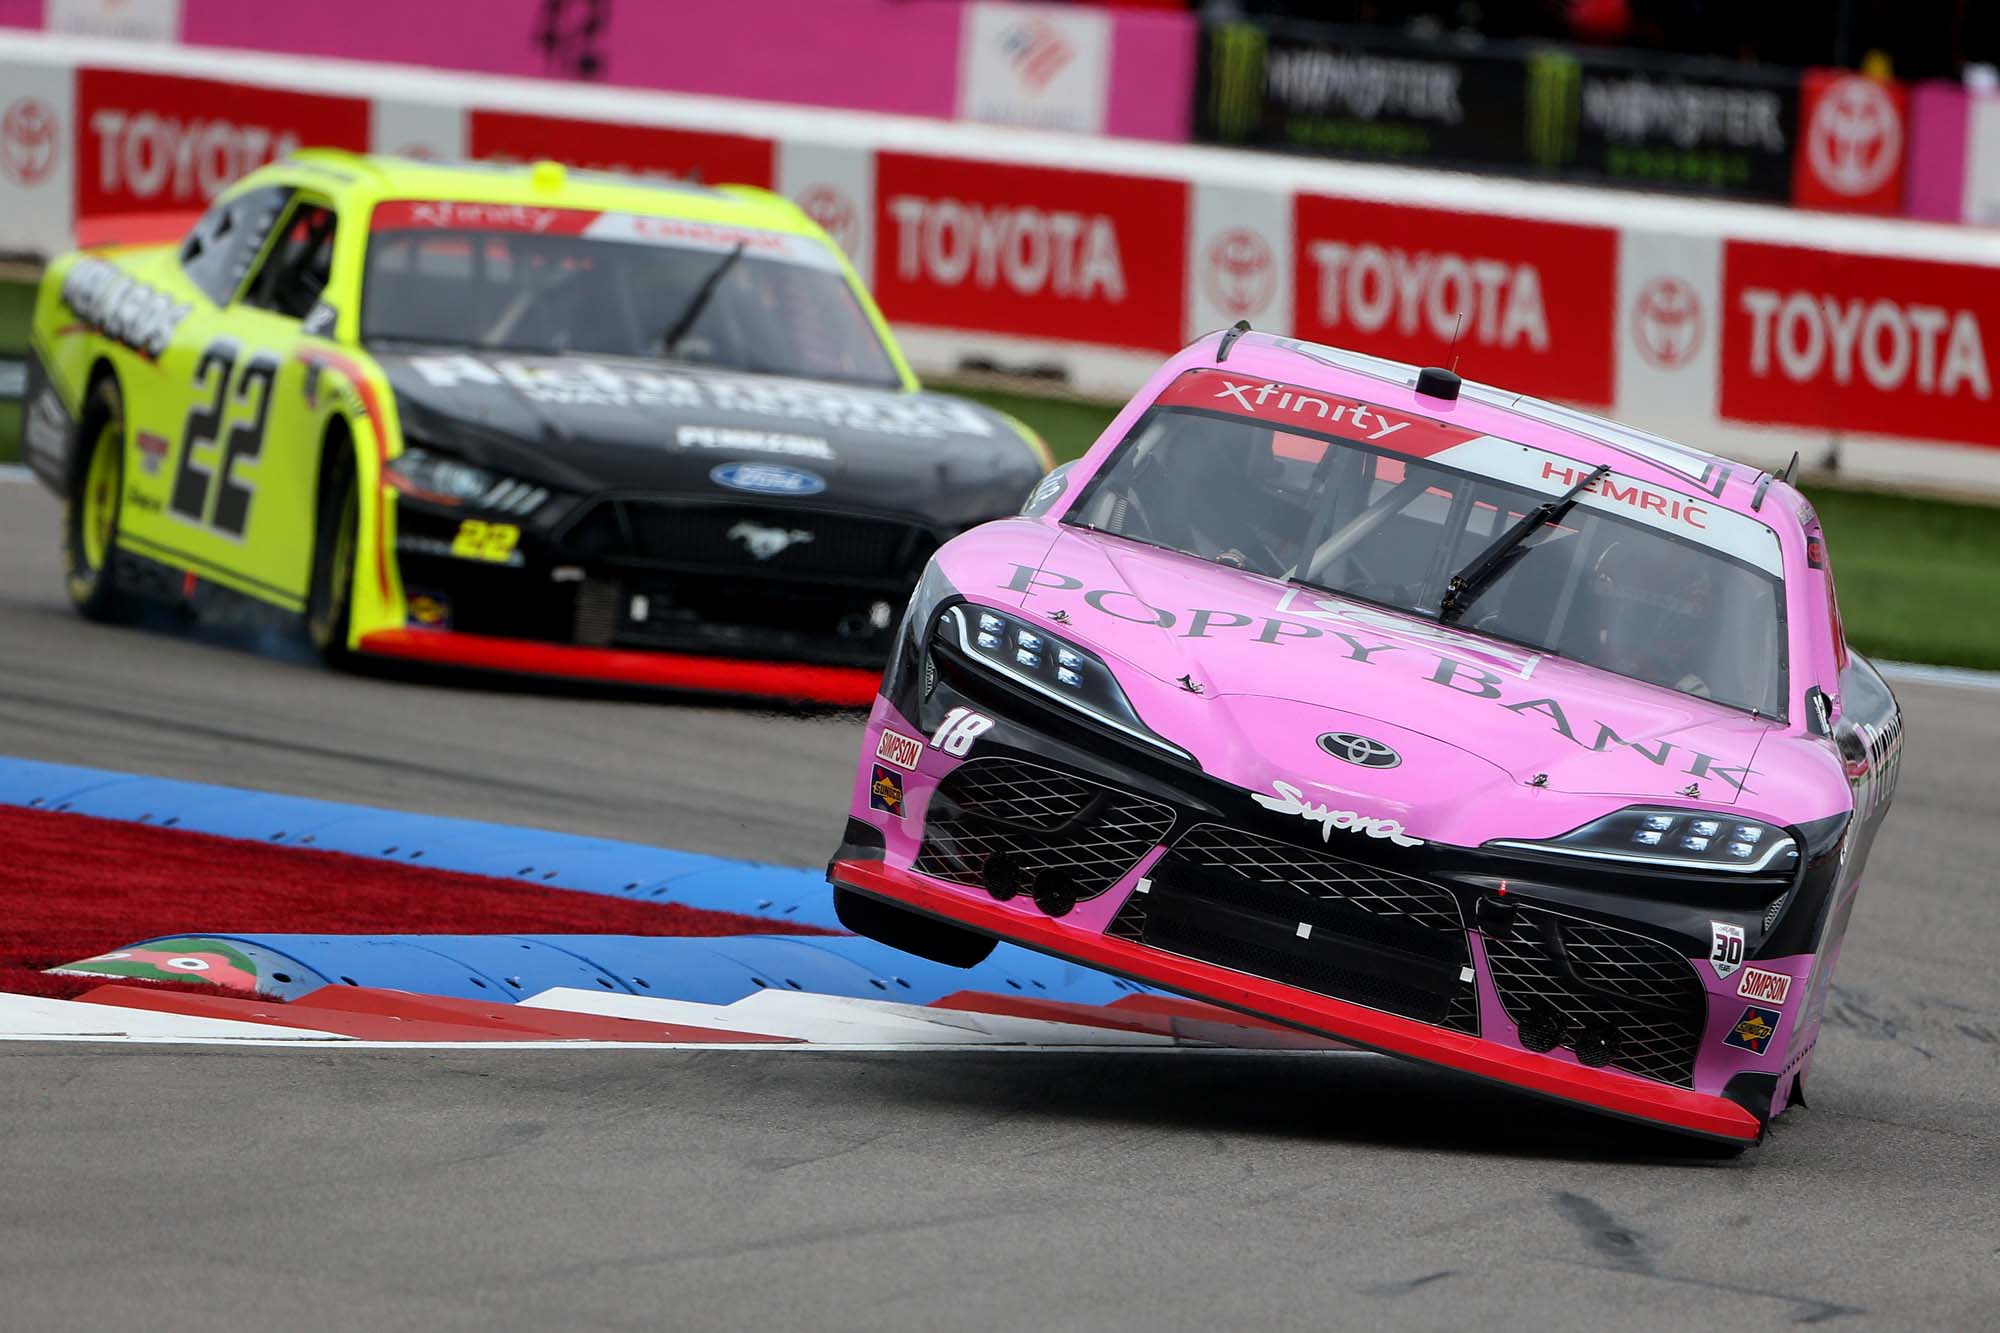 NASCAR Xfinity Series Drive for the Cure 250 presented by Blue Cross Blue Shield of North Carolina